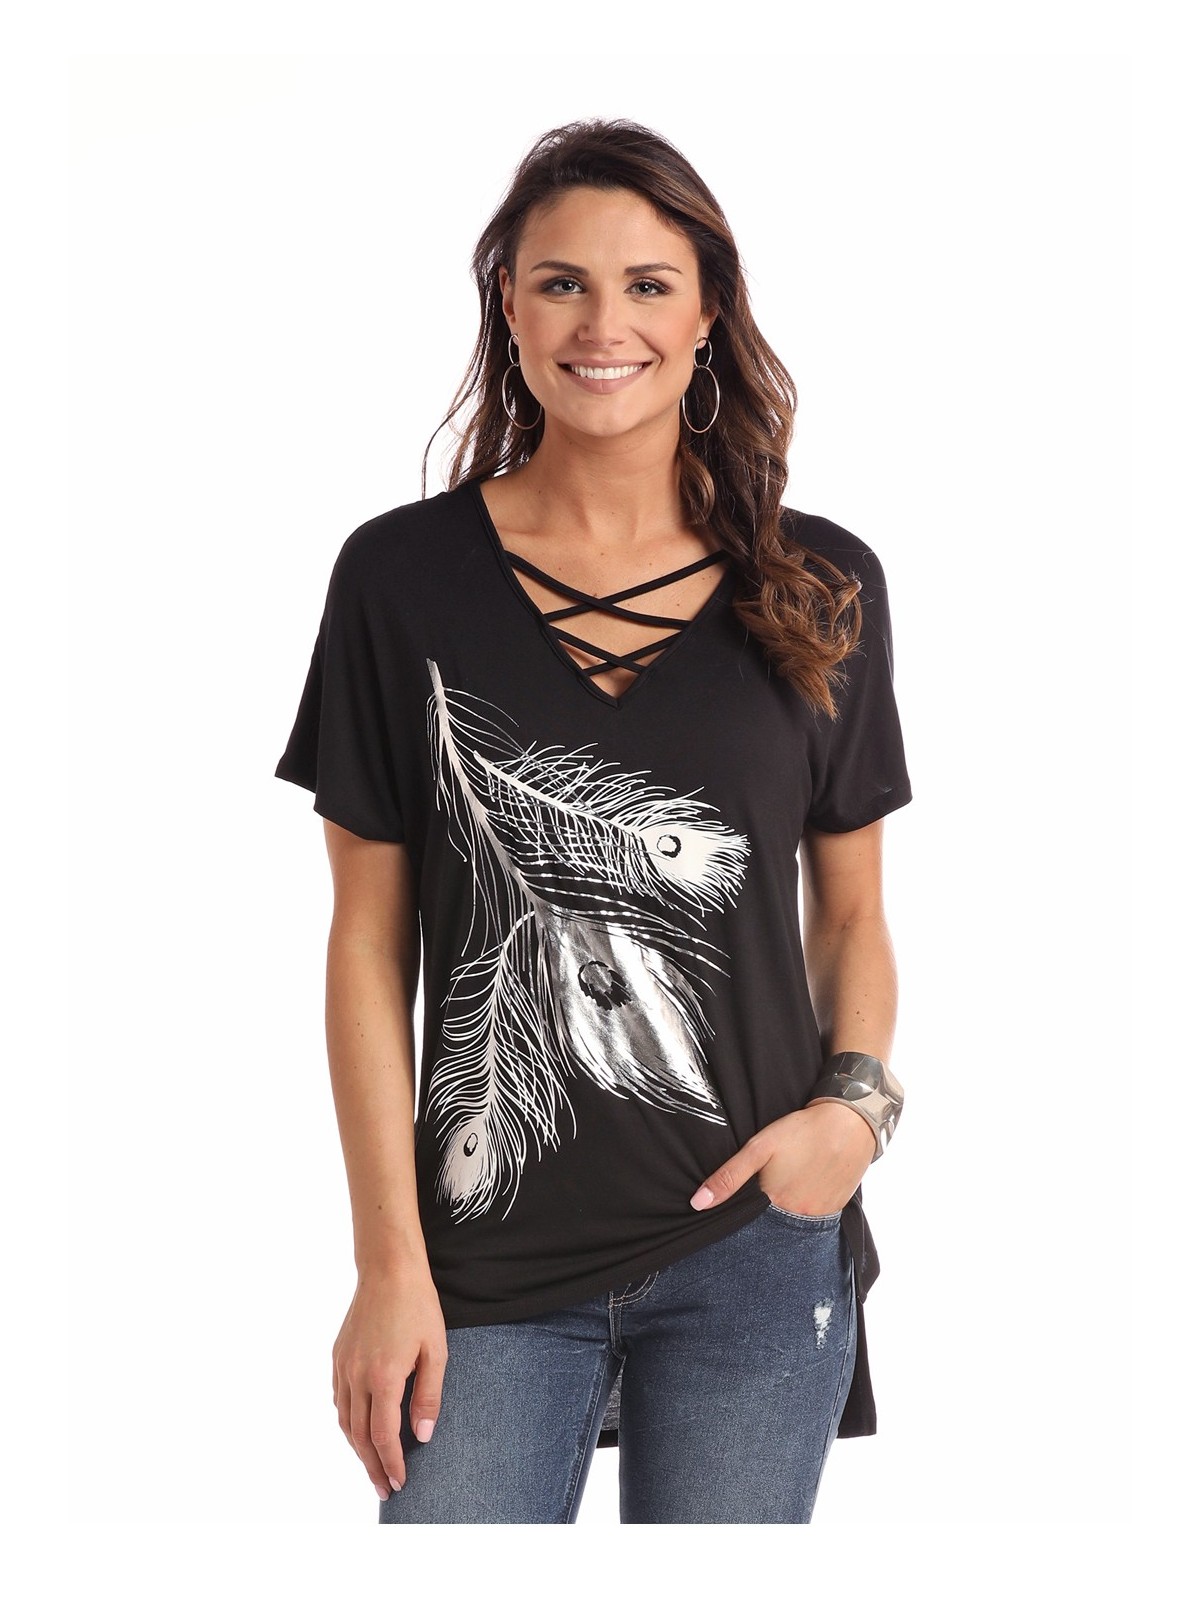 Silver Feather Shirt